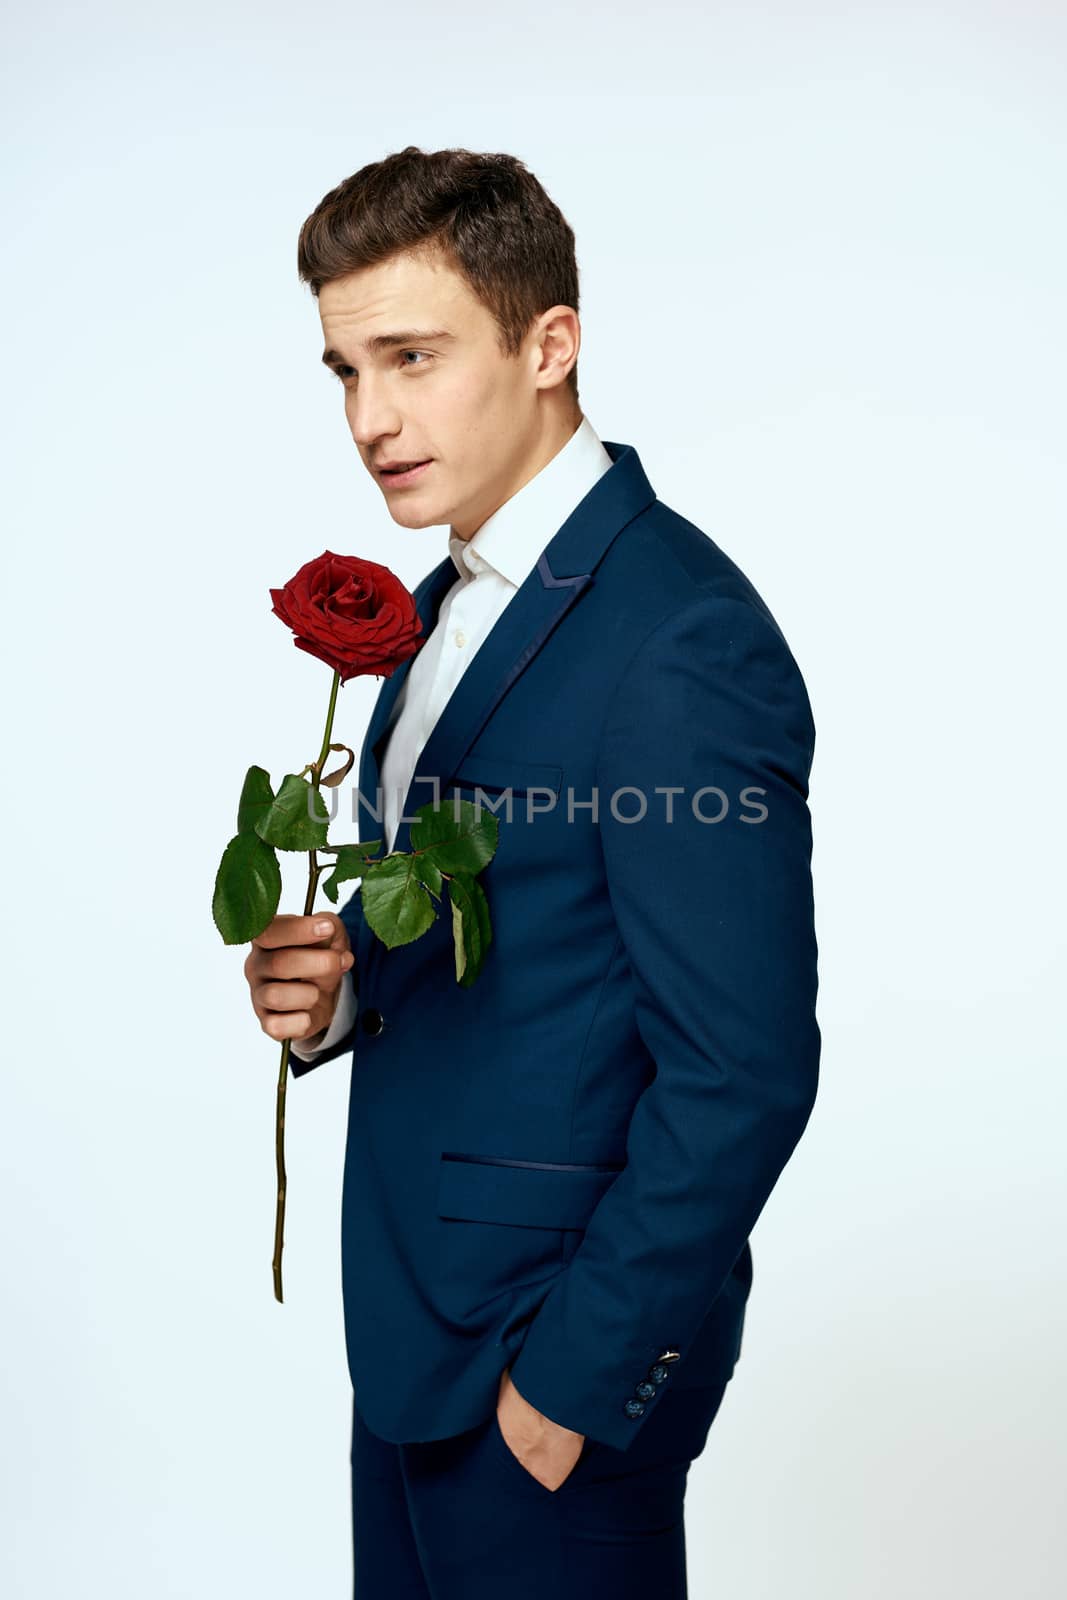 A man in a suit with a rose in his hands a gift date light background by SHOTPRIME